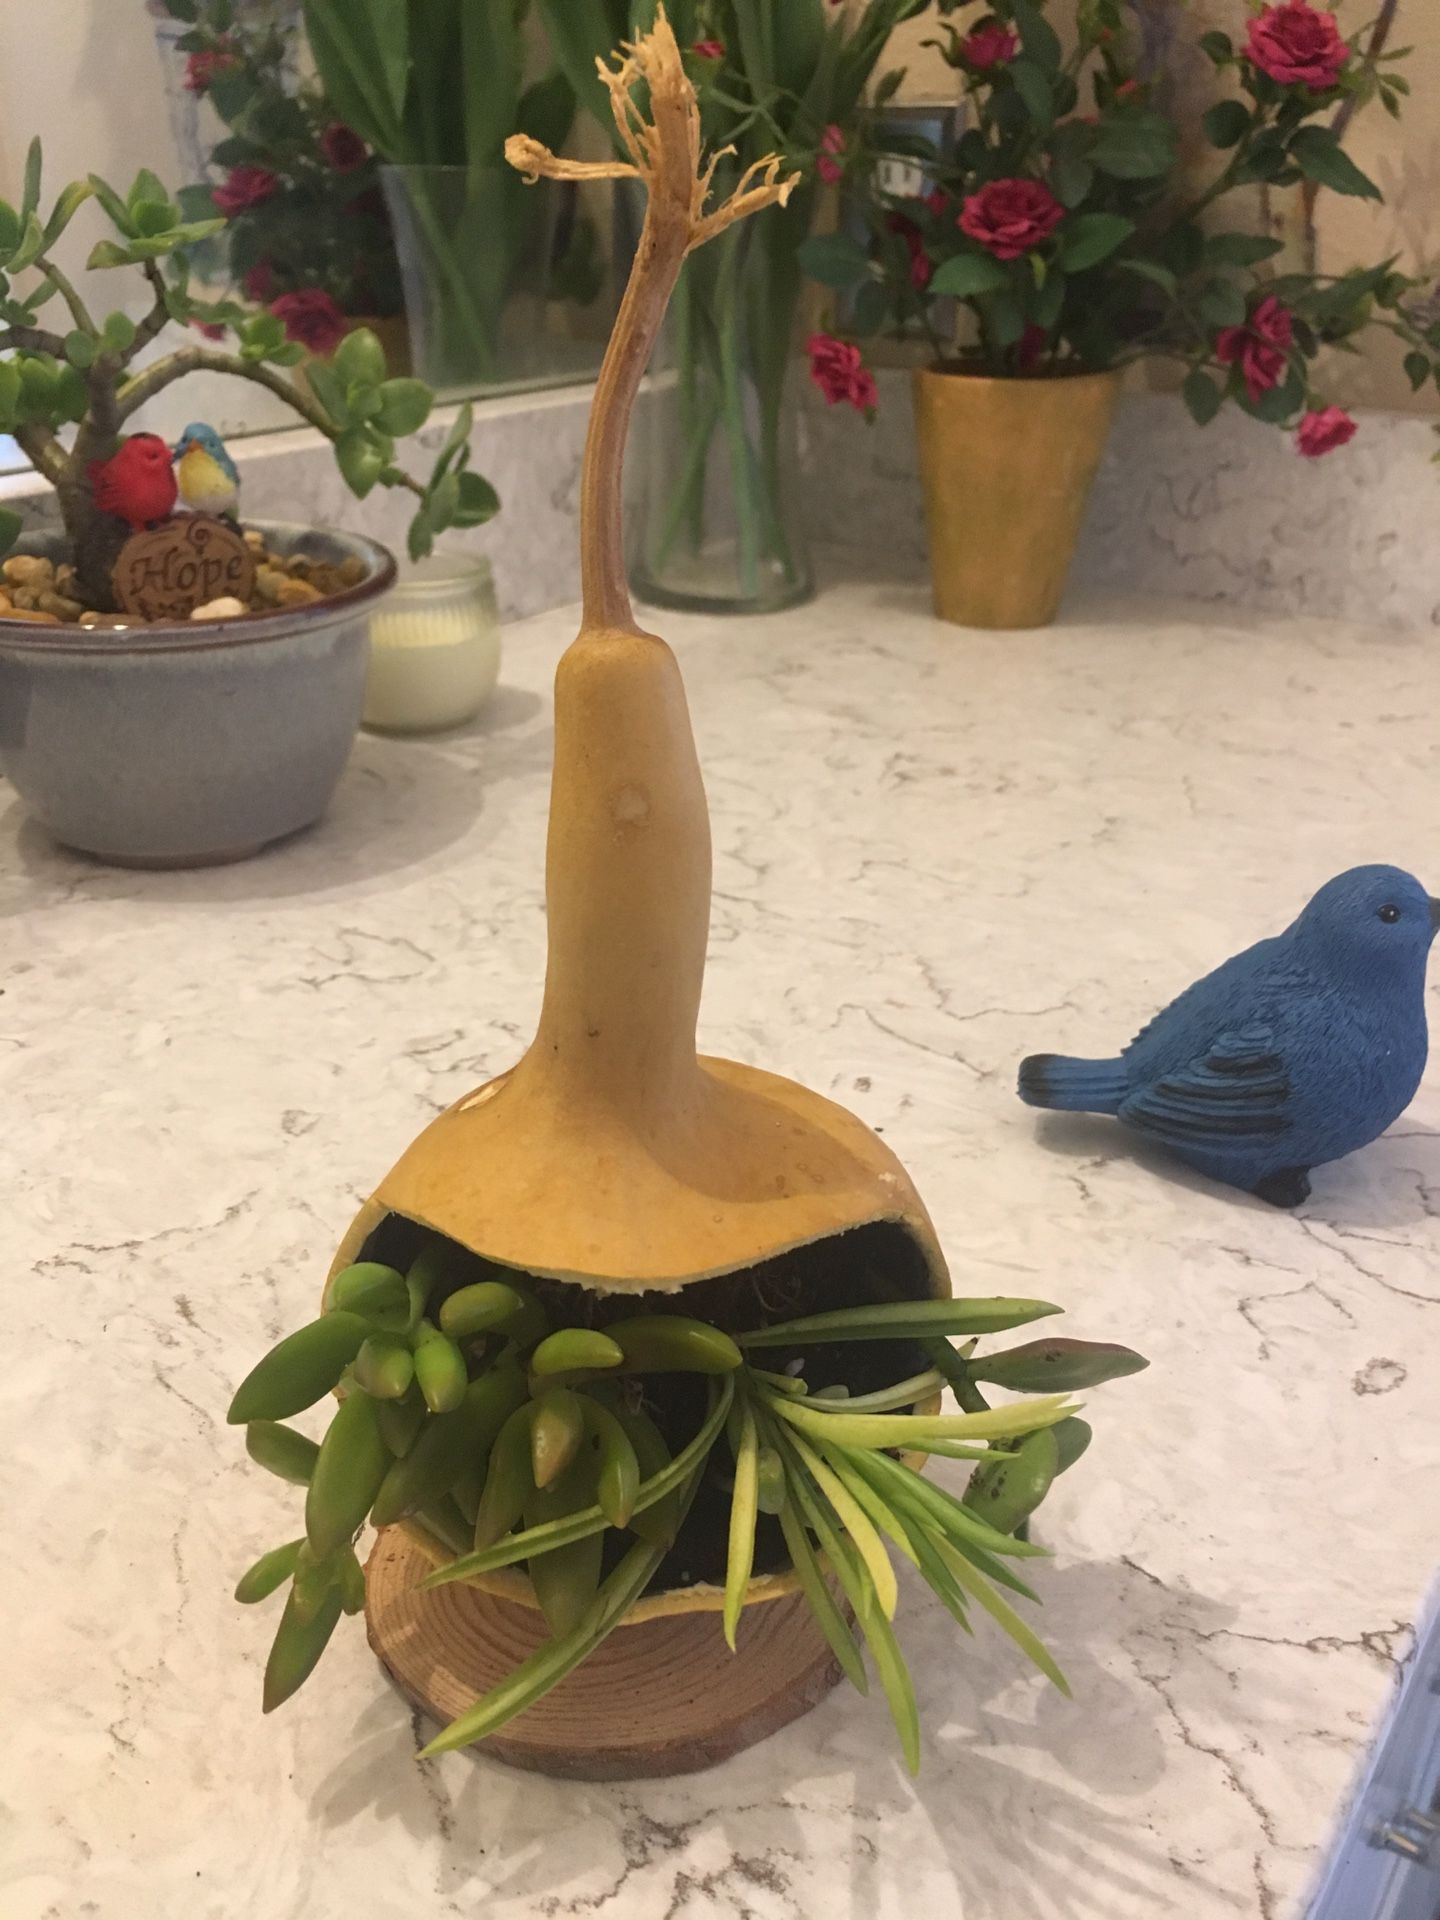 Gourd full of succulents